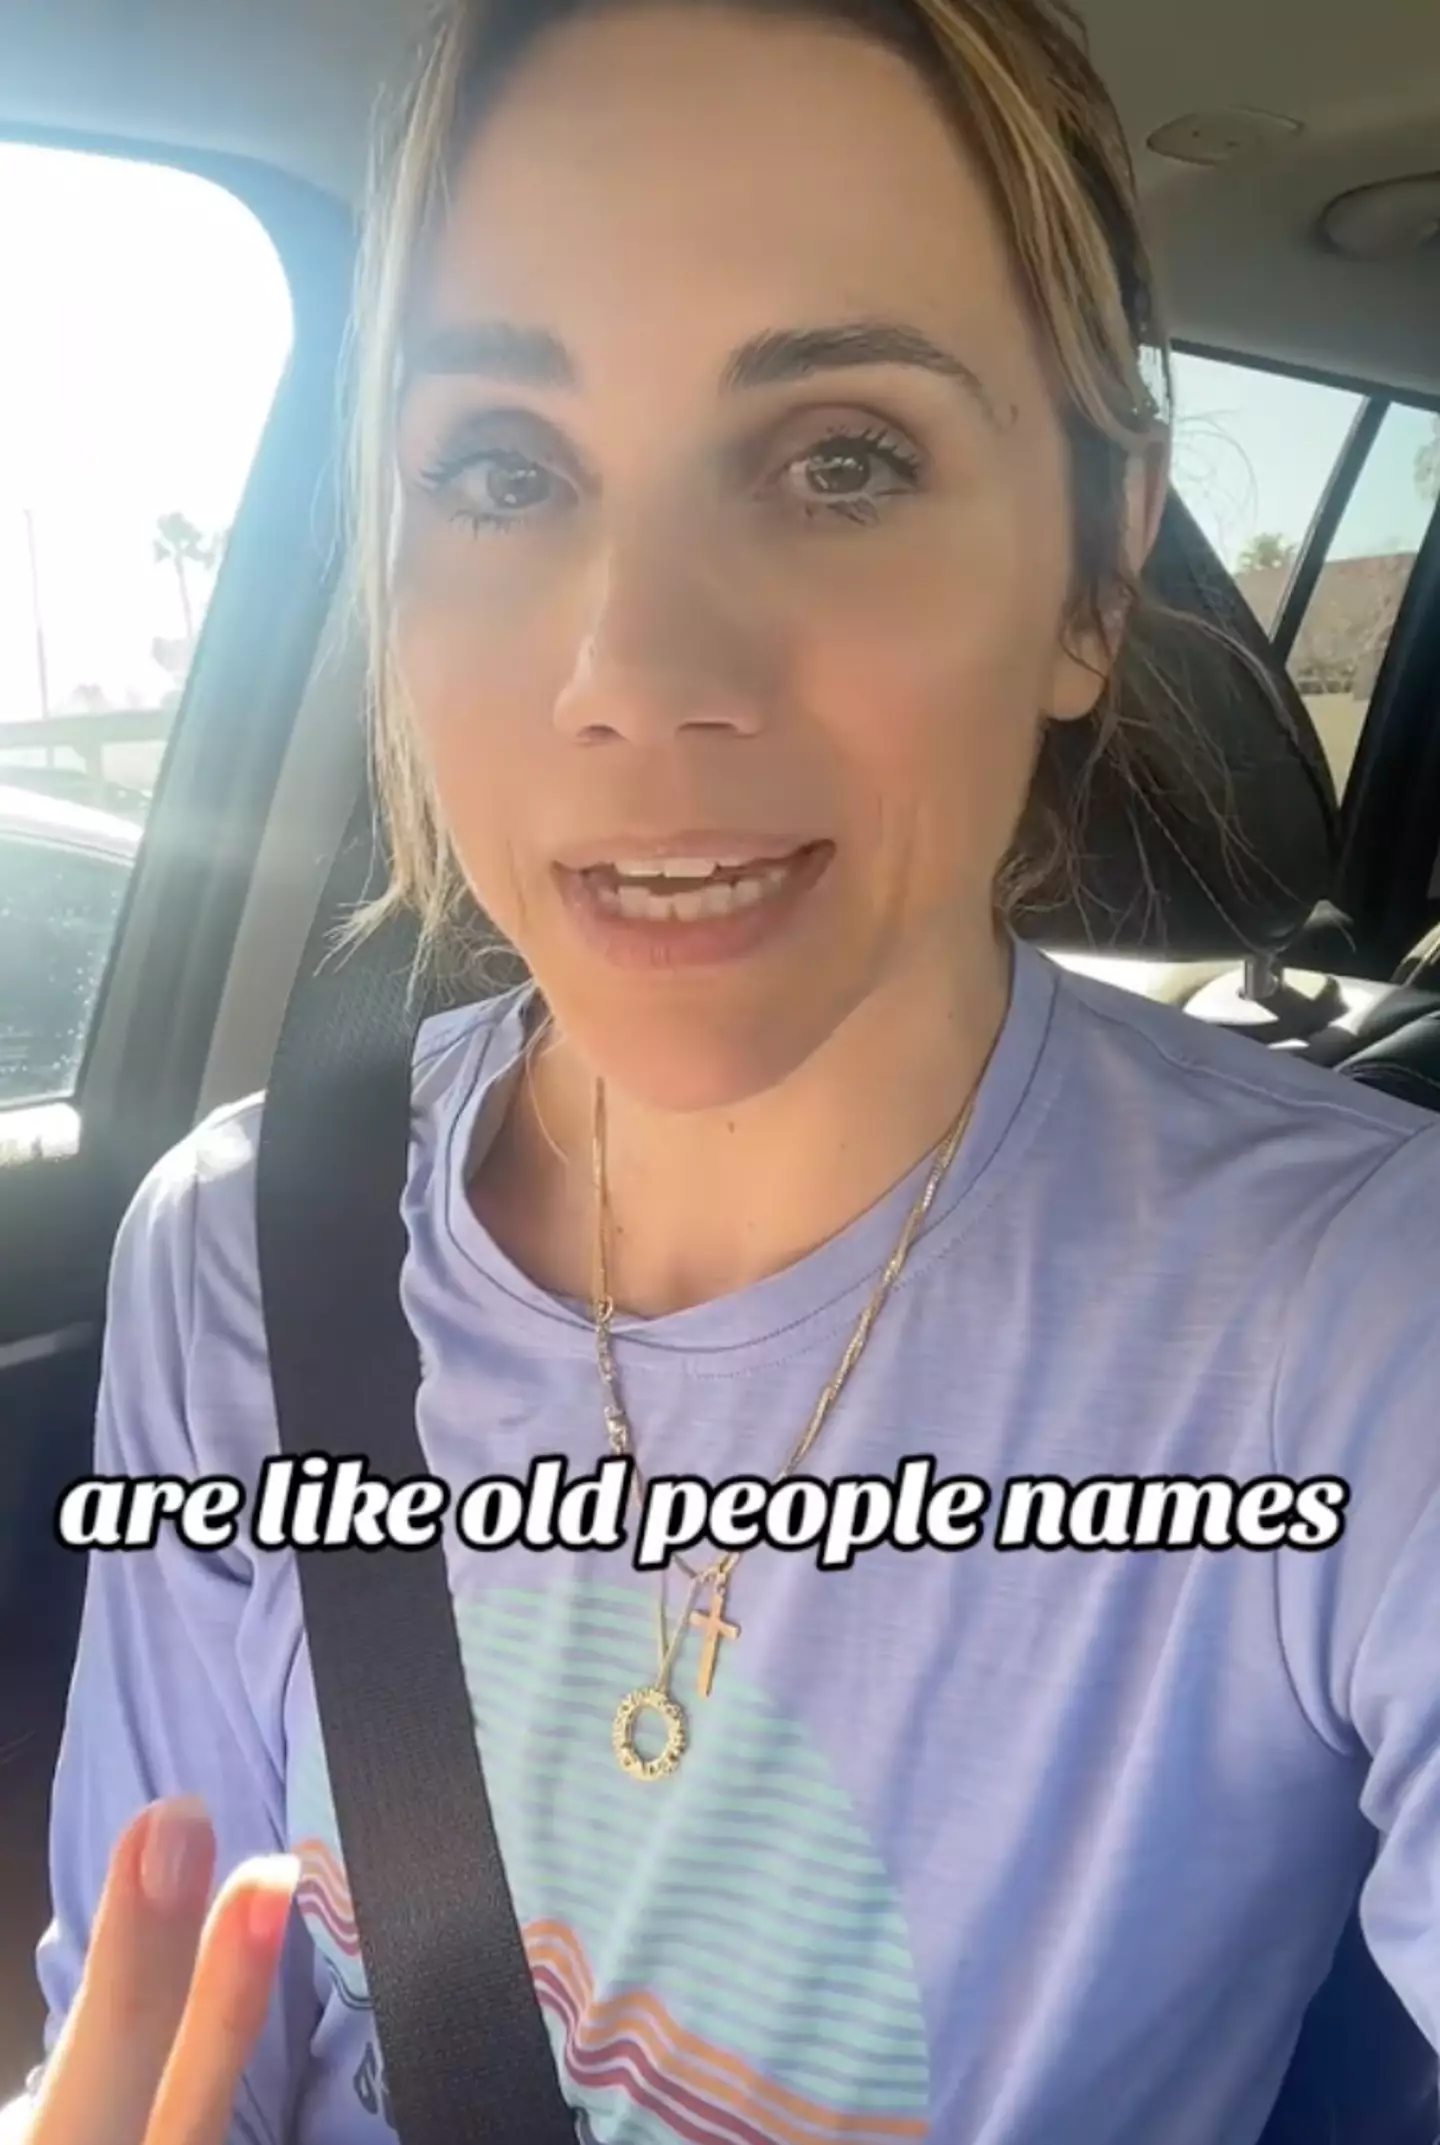 A woman took to TikTok to share the popular 'millennial' names kids now think are 'old people's names'.